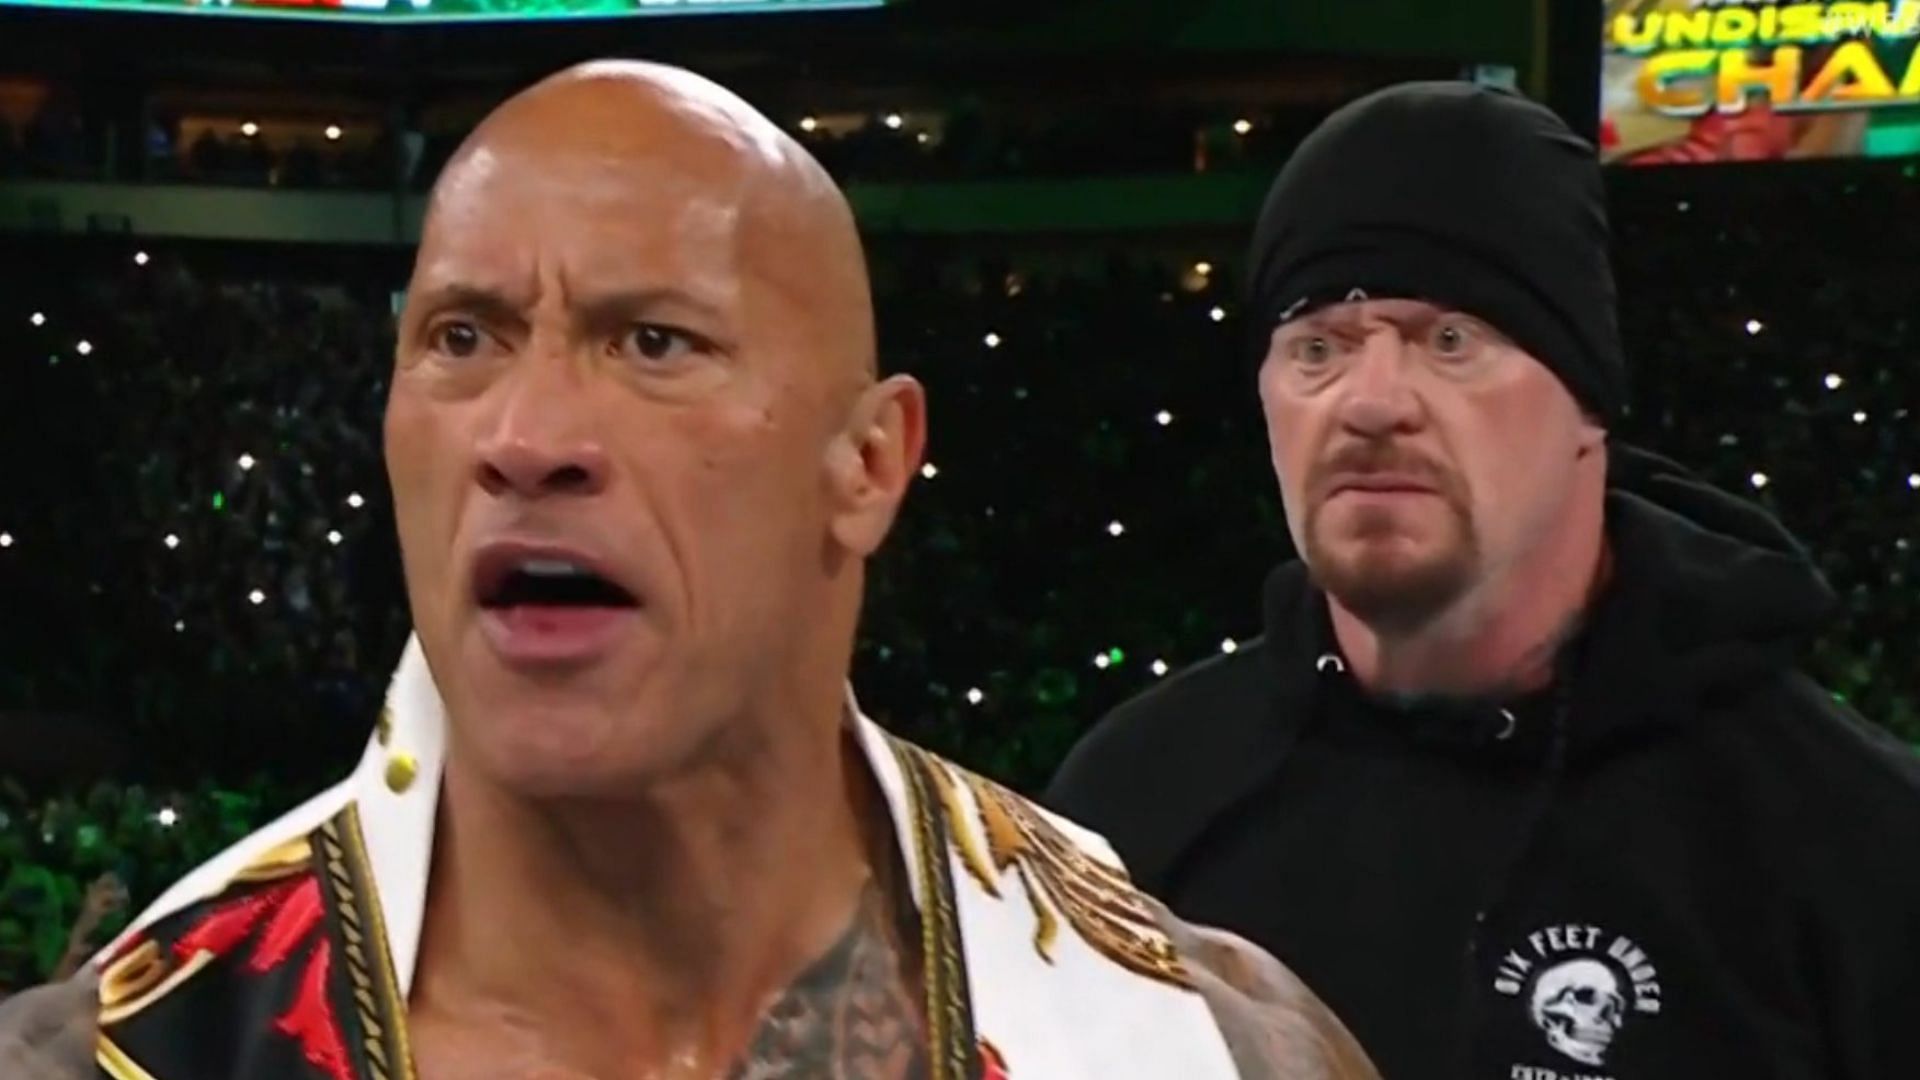 The Undertaker appeared behind The Rock at WrestleMania 40.